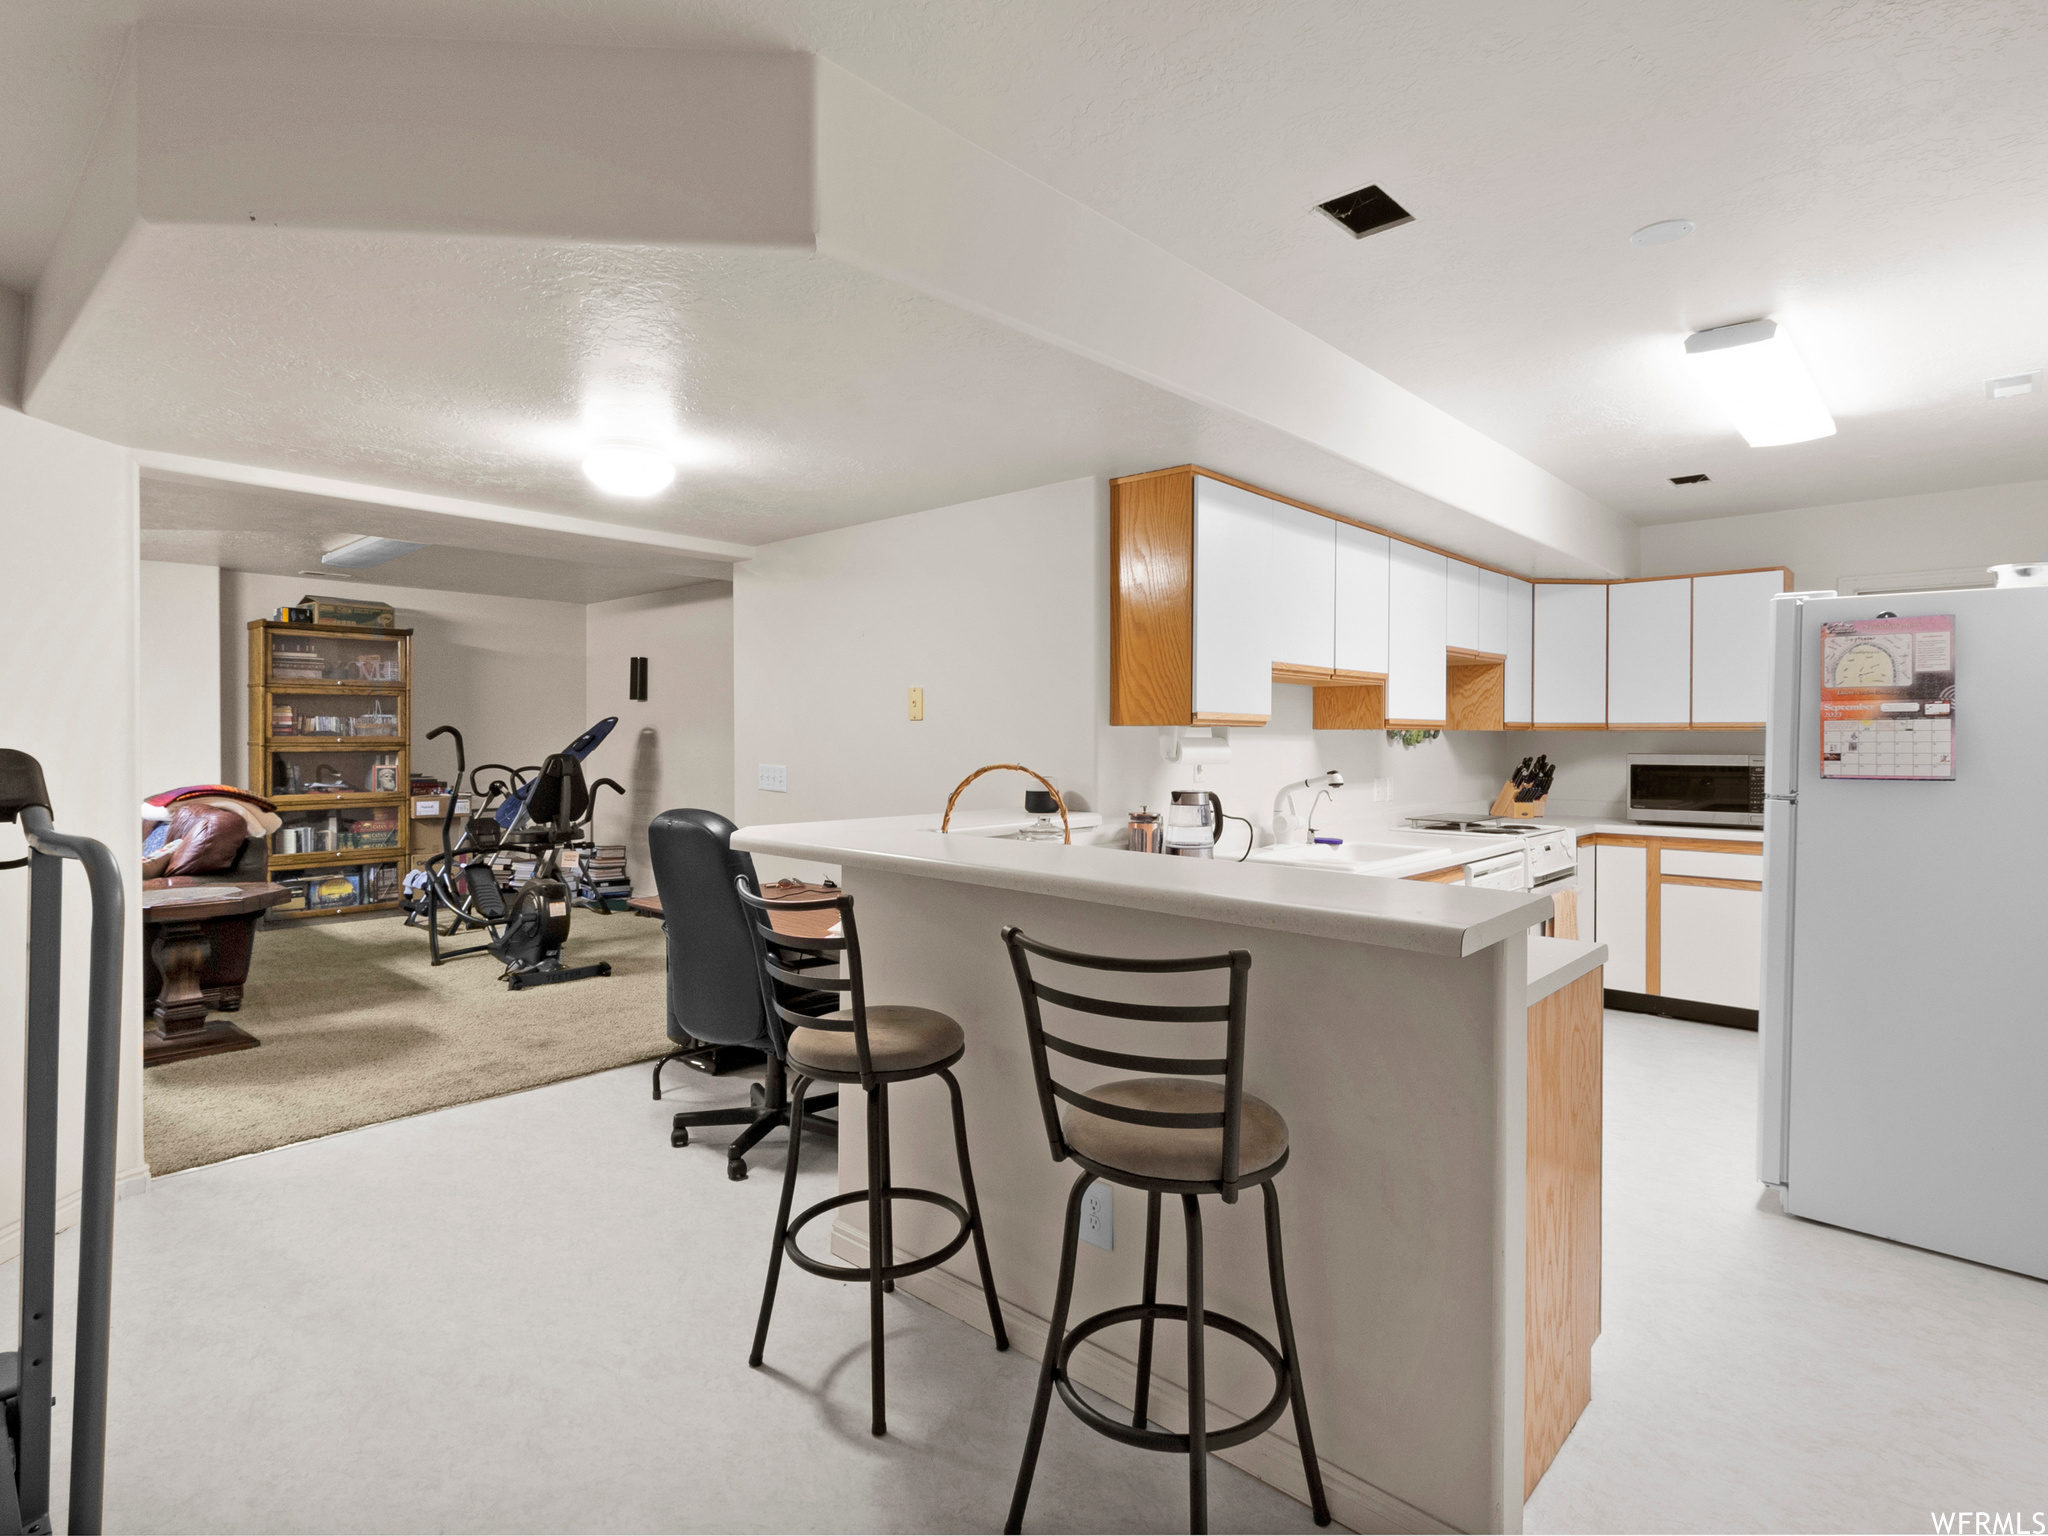 Second basement kitchen with a kitchen island, light countertops, and white appliances